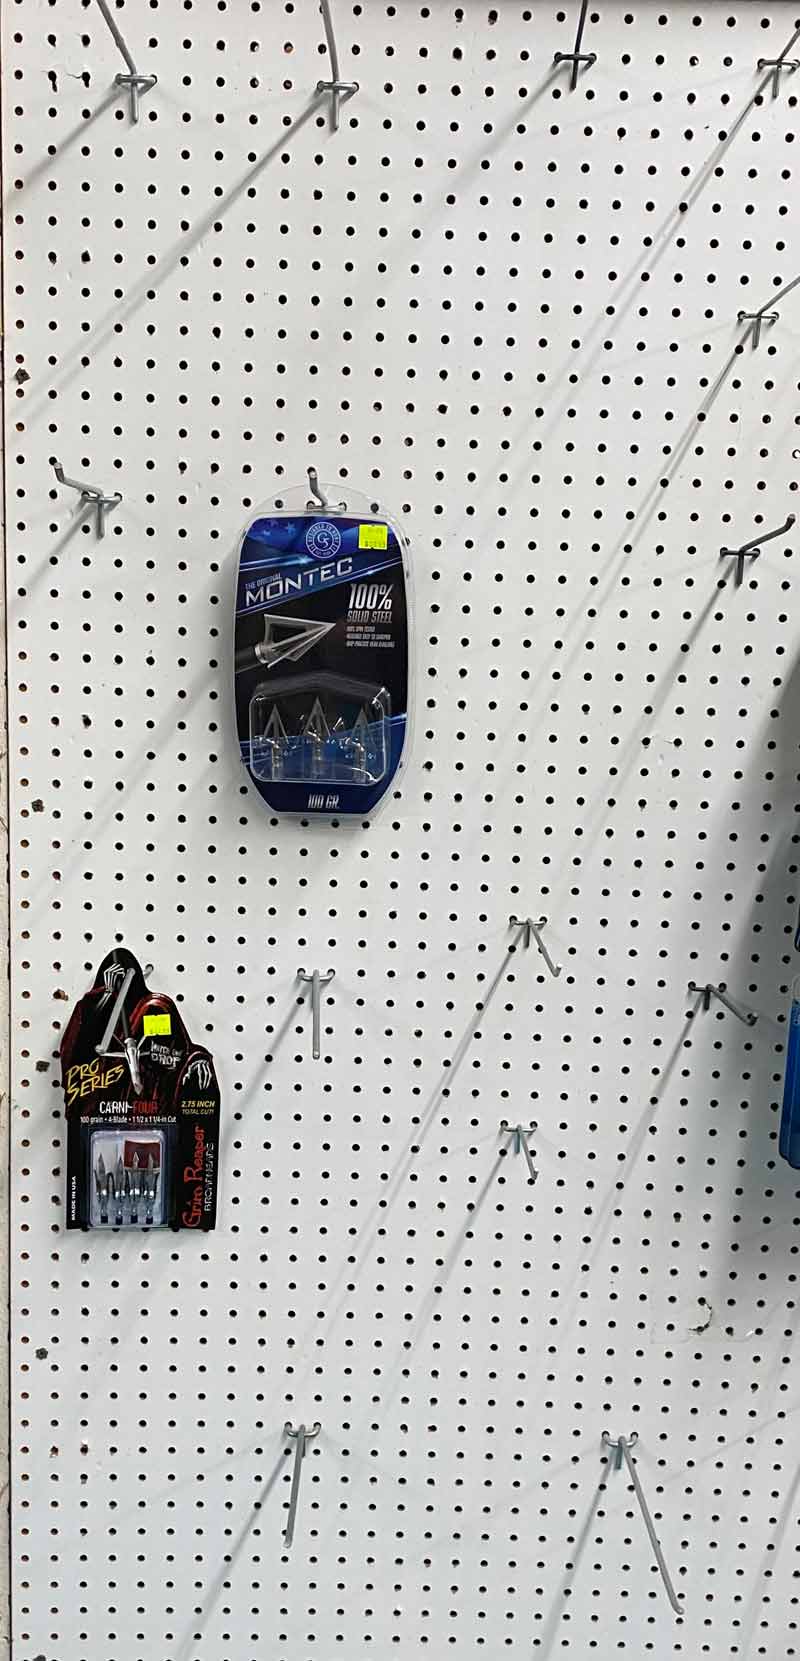 Manufacturing slowdowns dating to the spring of 2020 have left shelves empty of many archery accessories. (Photo by Sammy Romano)